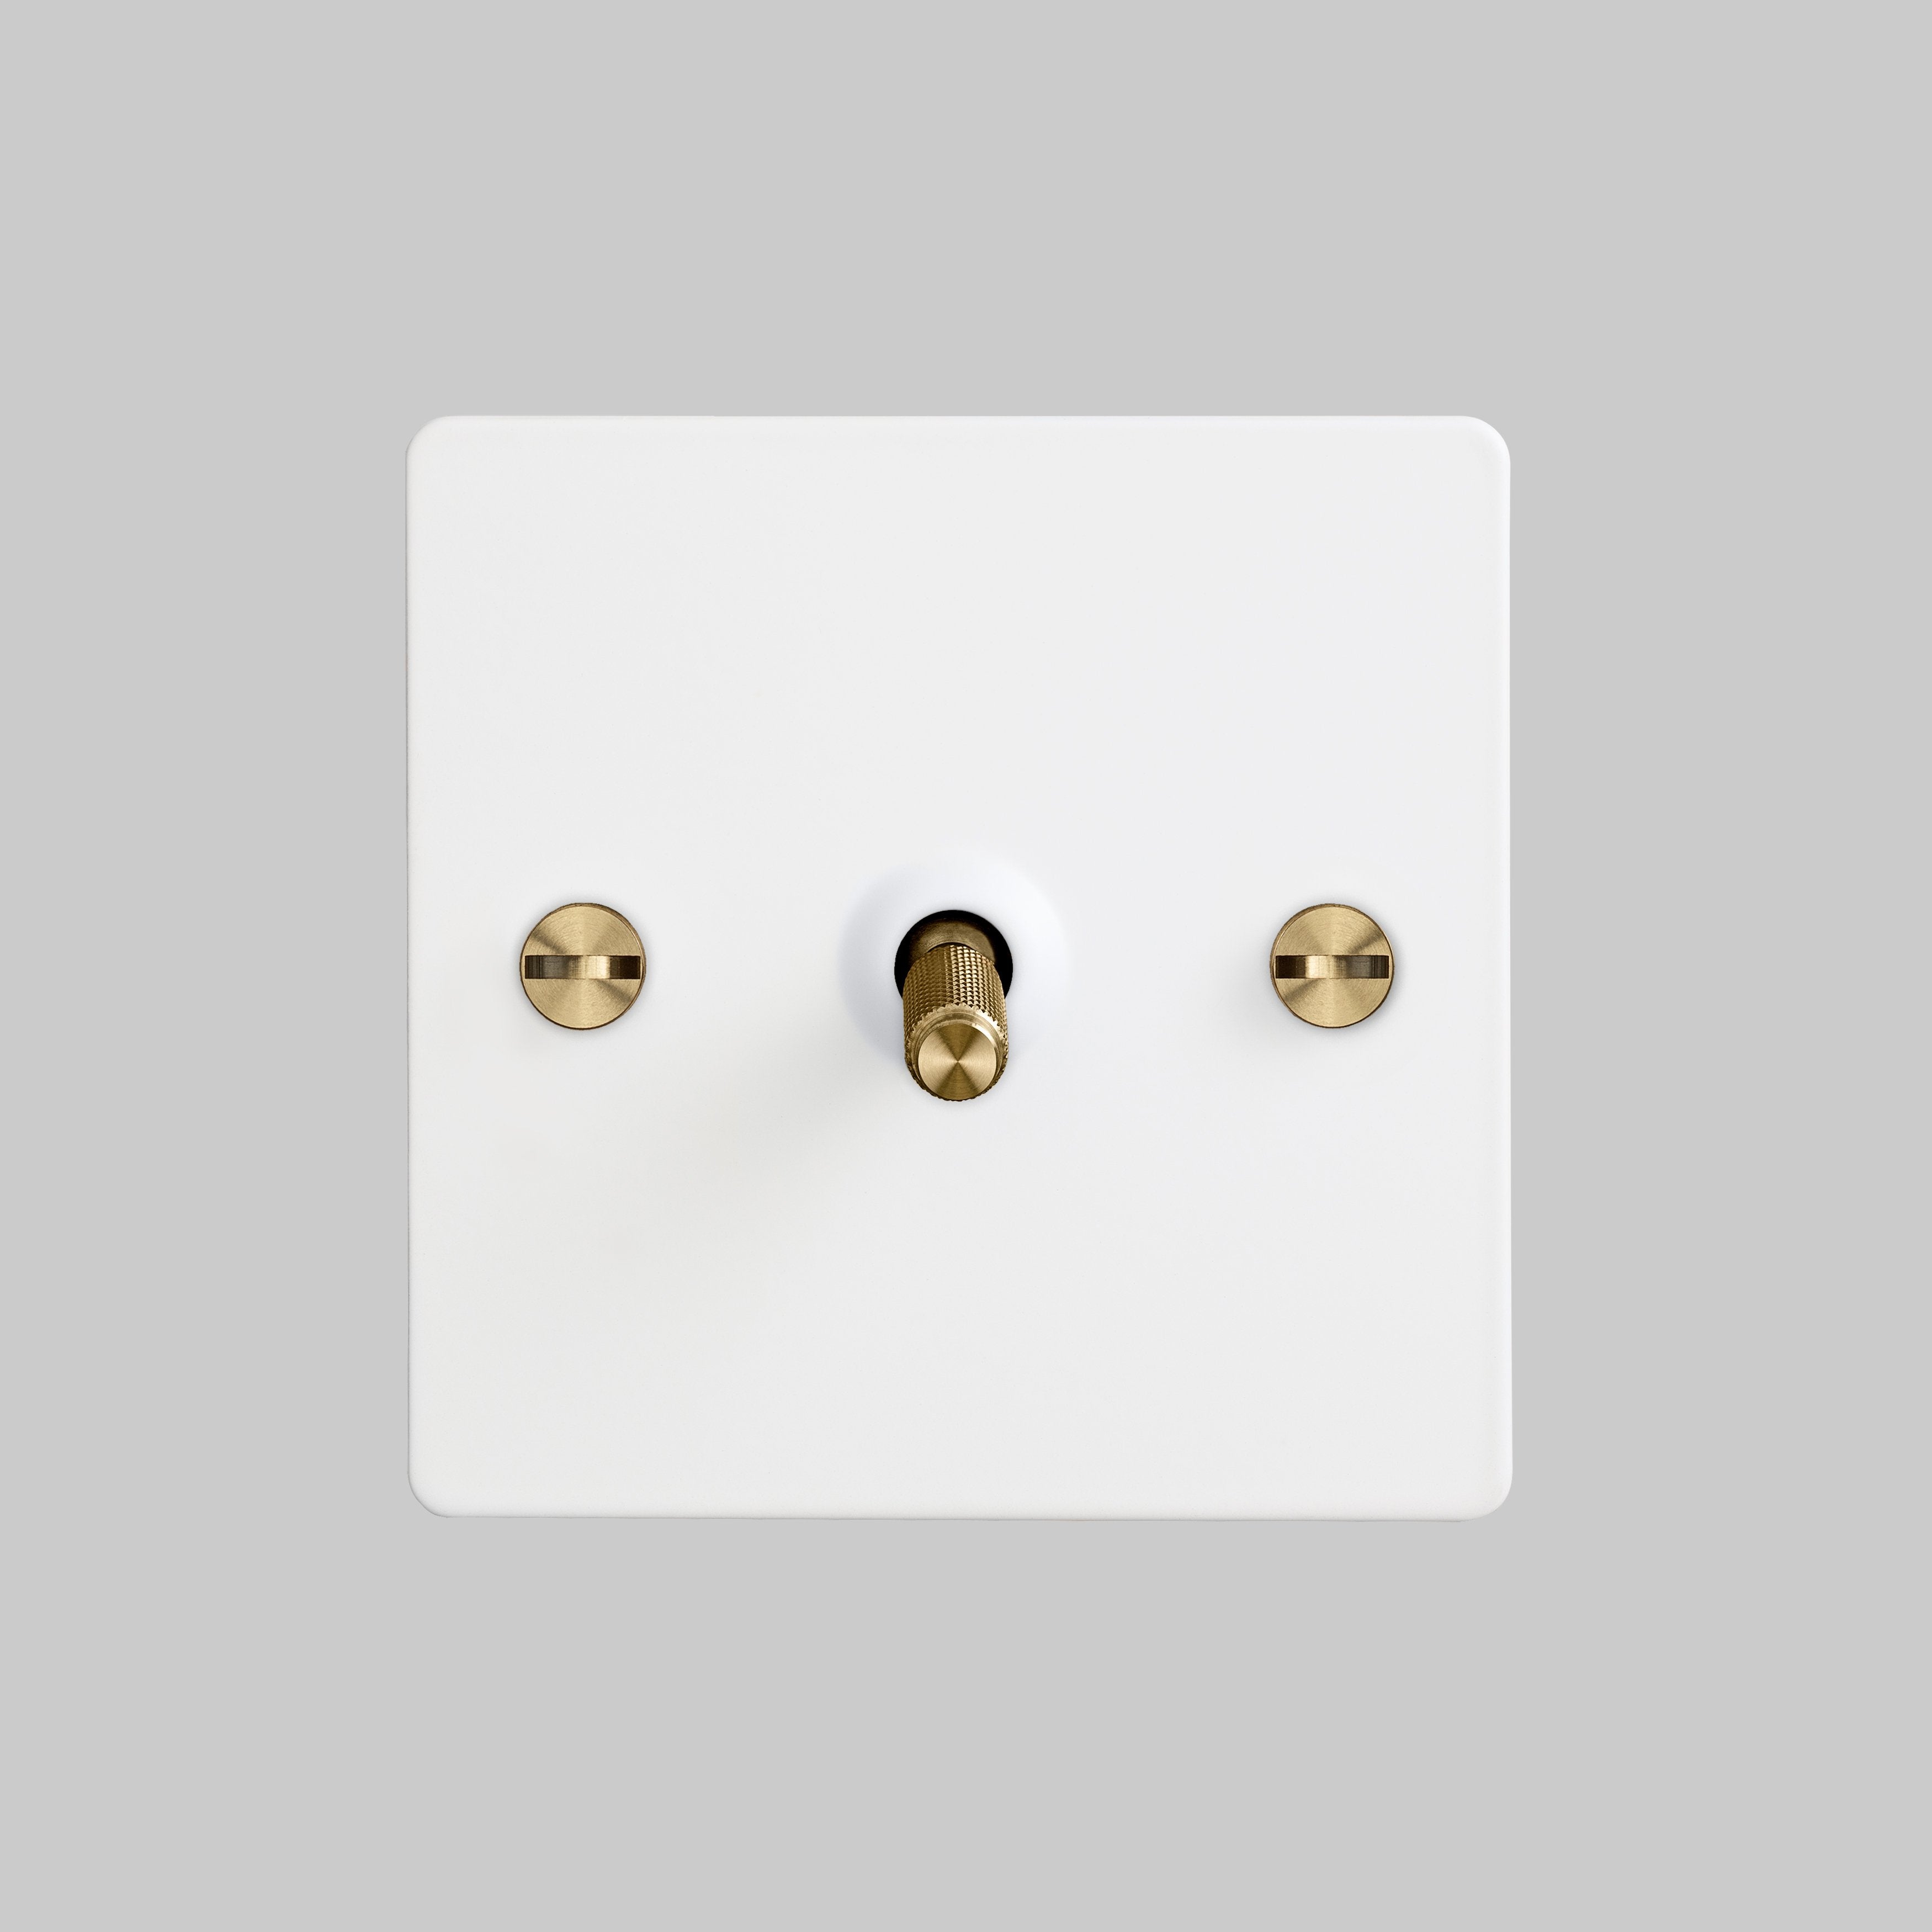 Buster and Punch 1G INTERMEDIATE TOGGLE SWITCH / WHITE / BRASS